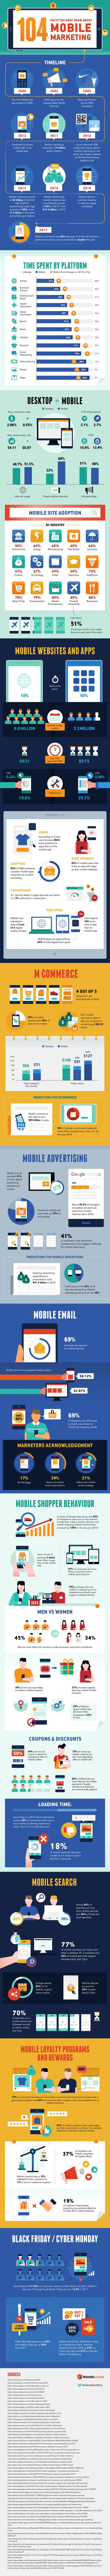 Have You Adopted Mobile for Your Business? It’s Time!